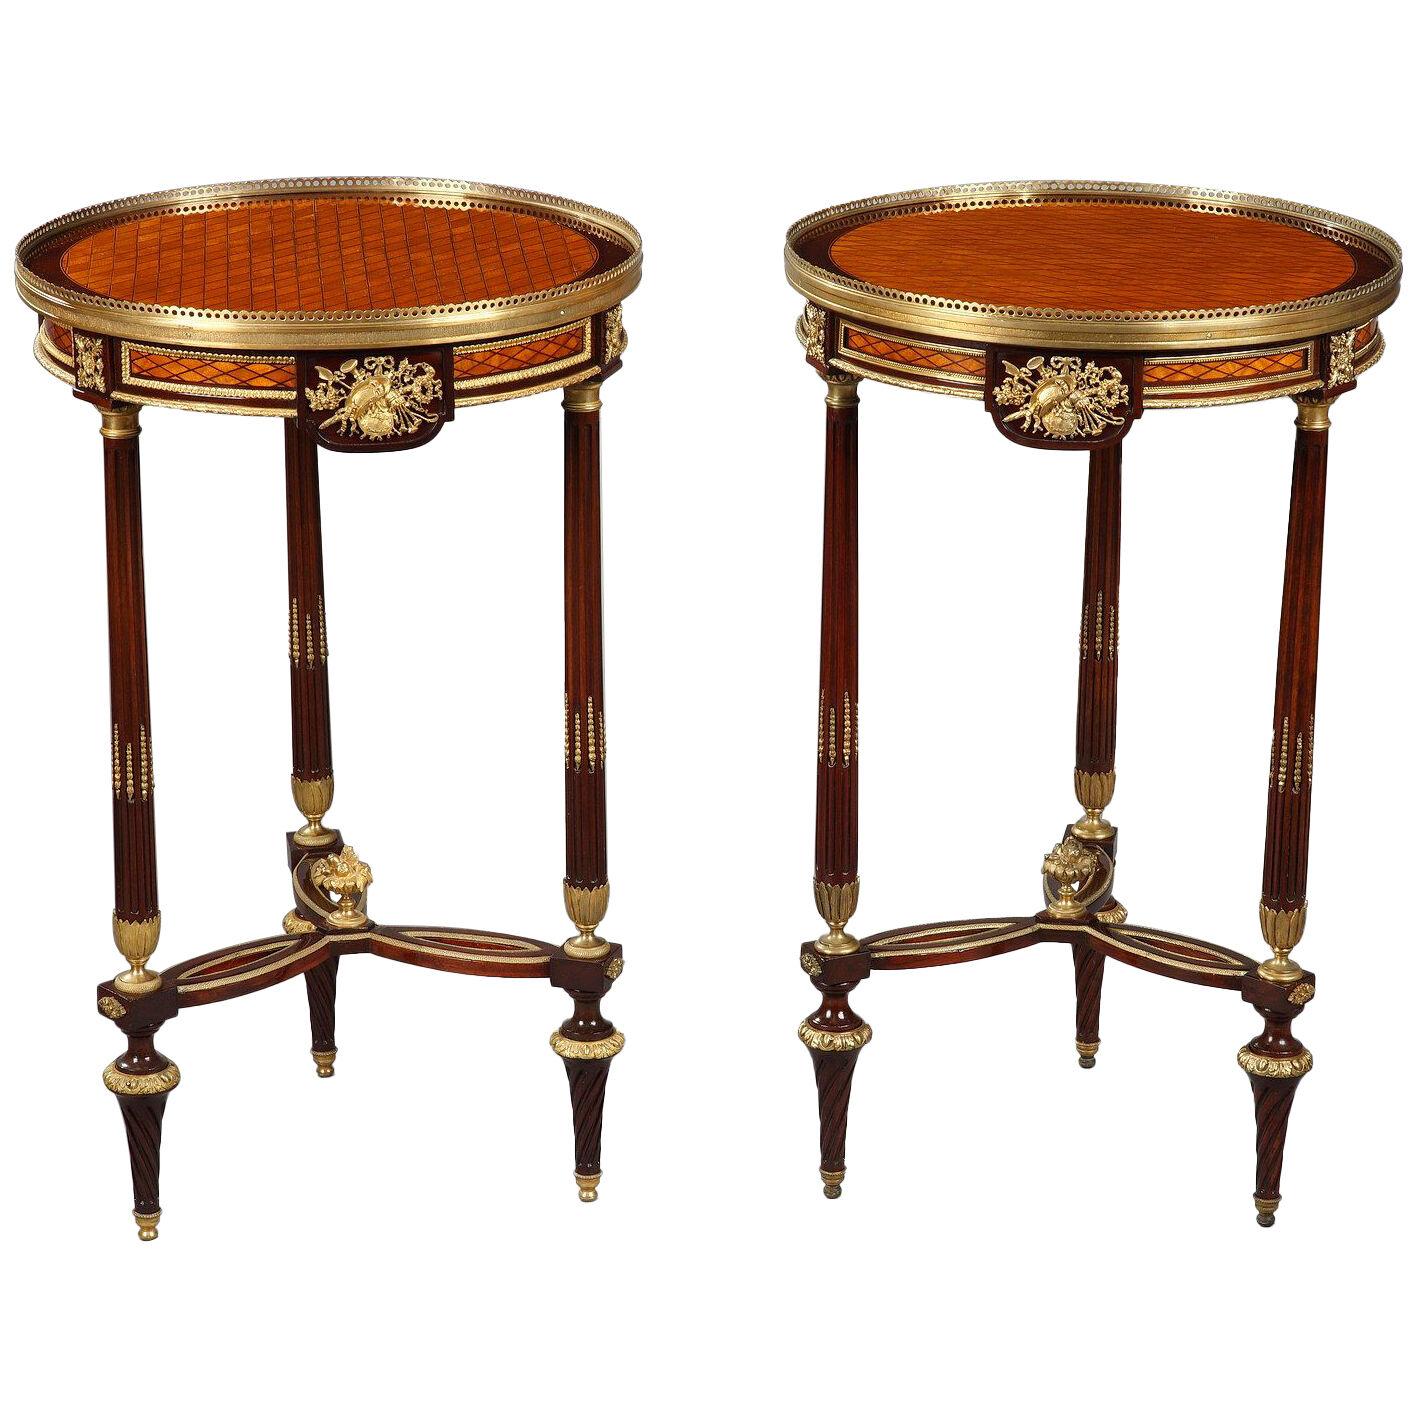 Pair of Louis XVI Style Gueridons Attributed to Krieger, France, circa 1880